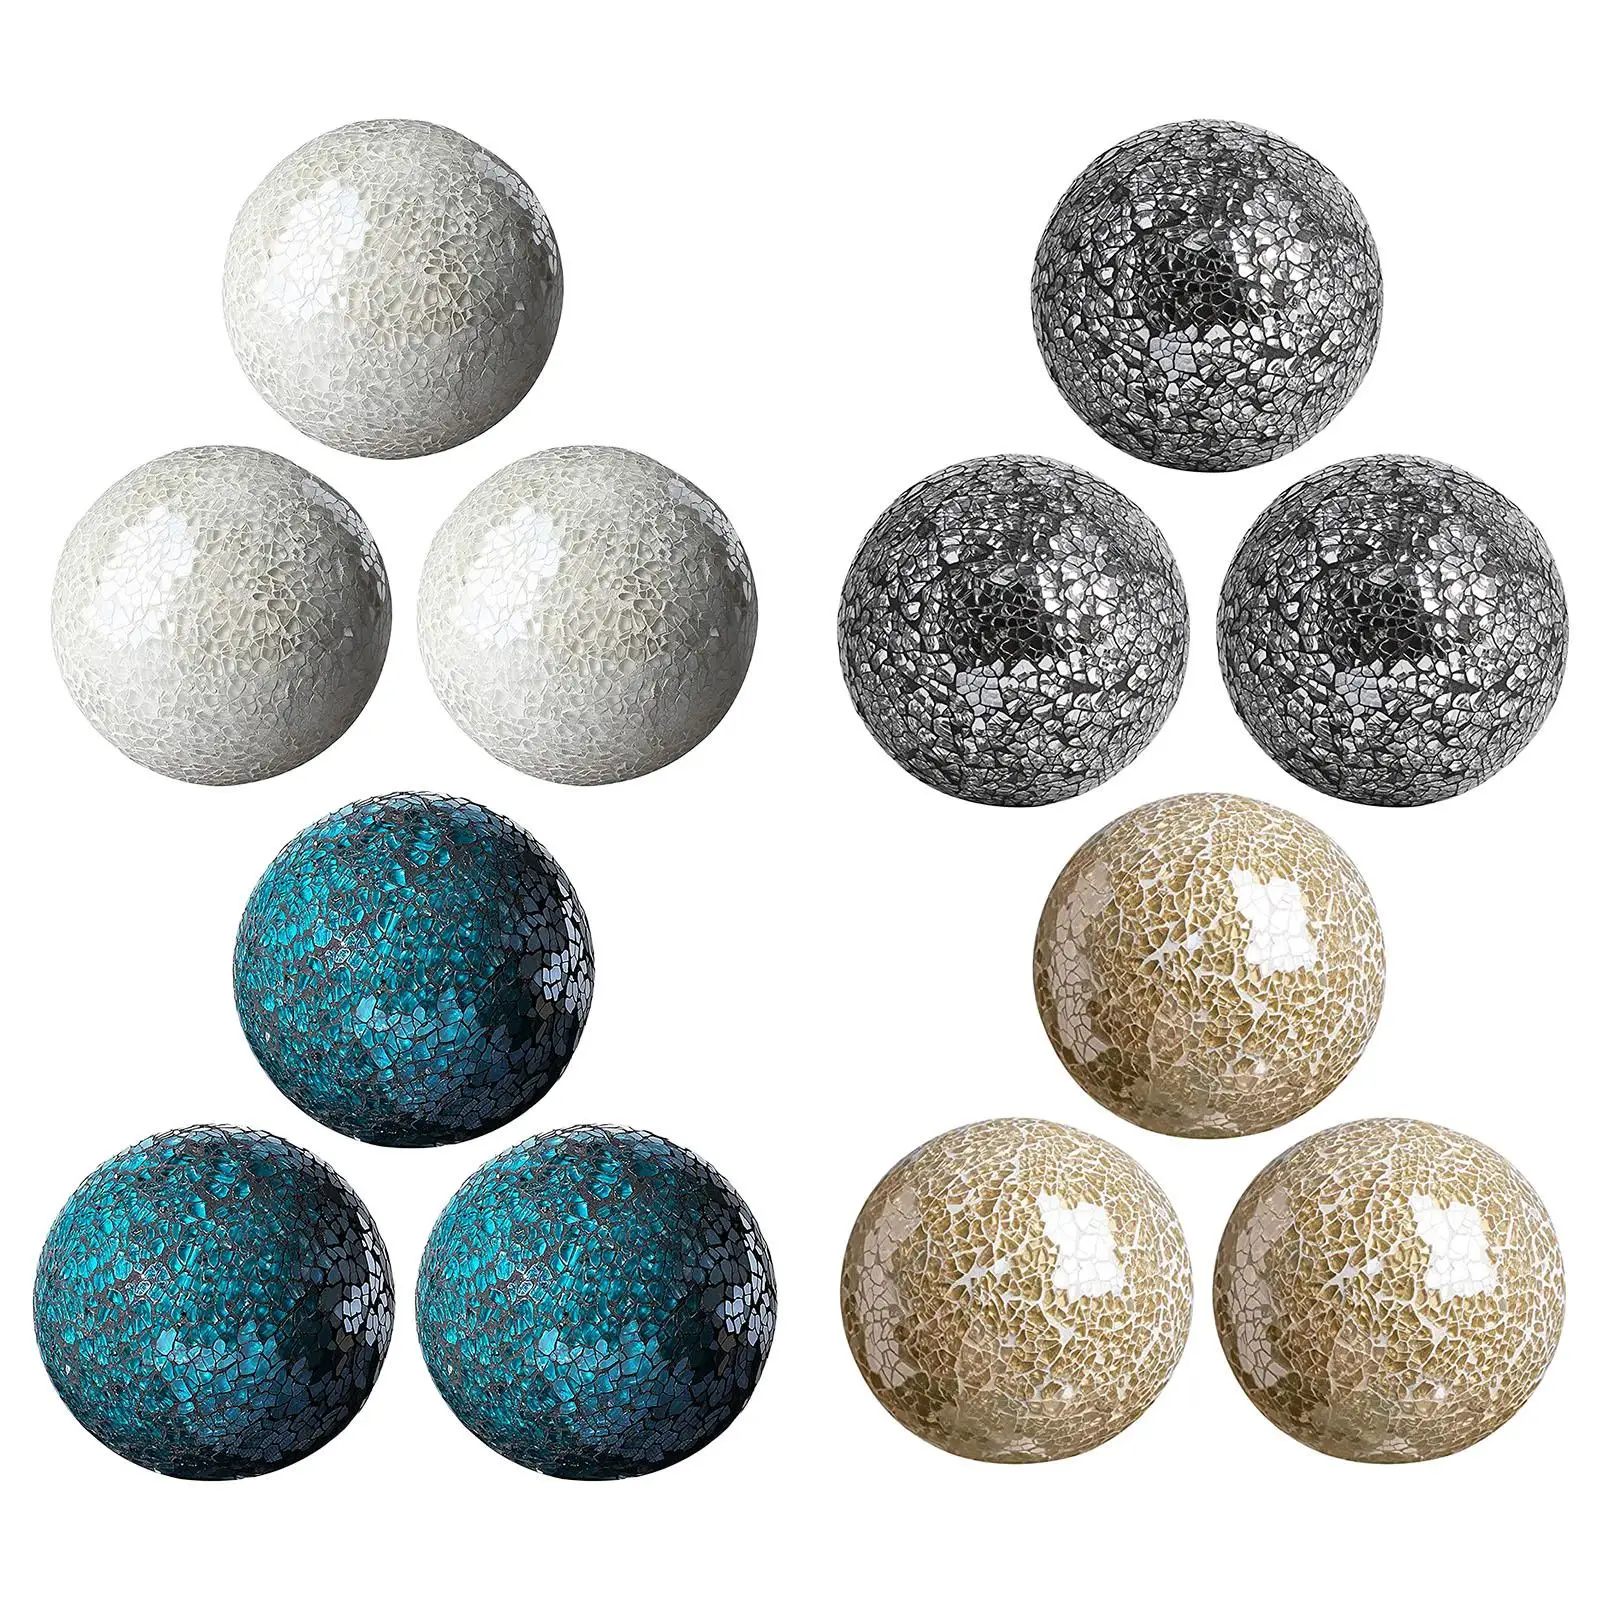 3Pcs Housewares Glass Decorative Balls Home Decor Mosaic Sphere Ball Set for Bowls Vases Tray And Centerpiece images - 6